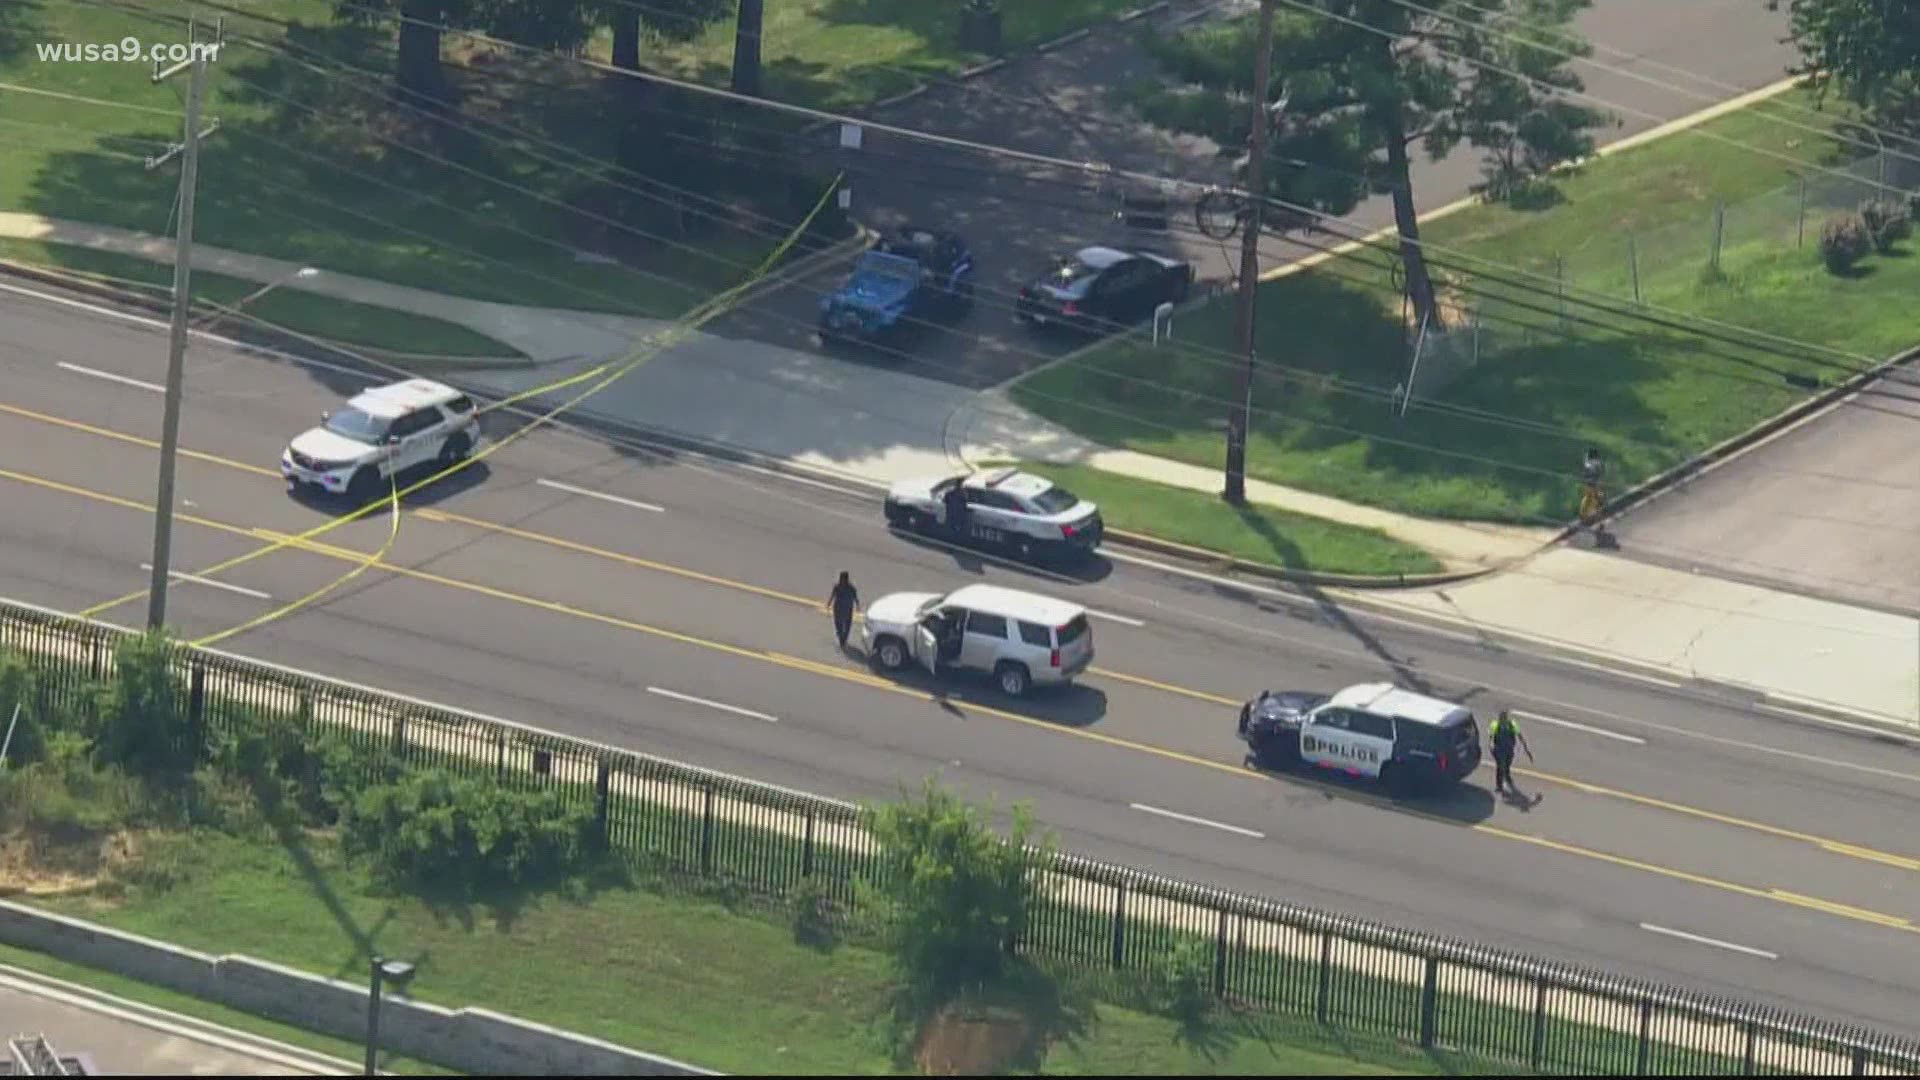 Allentown Road in Prince George's County, Md., is completely shutdown as police investigate a deadly hit-and-run